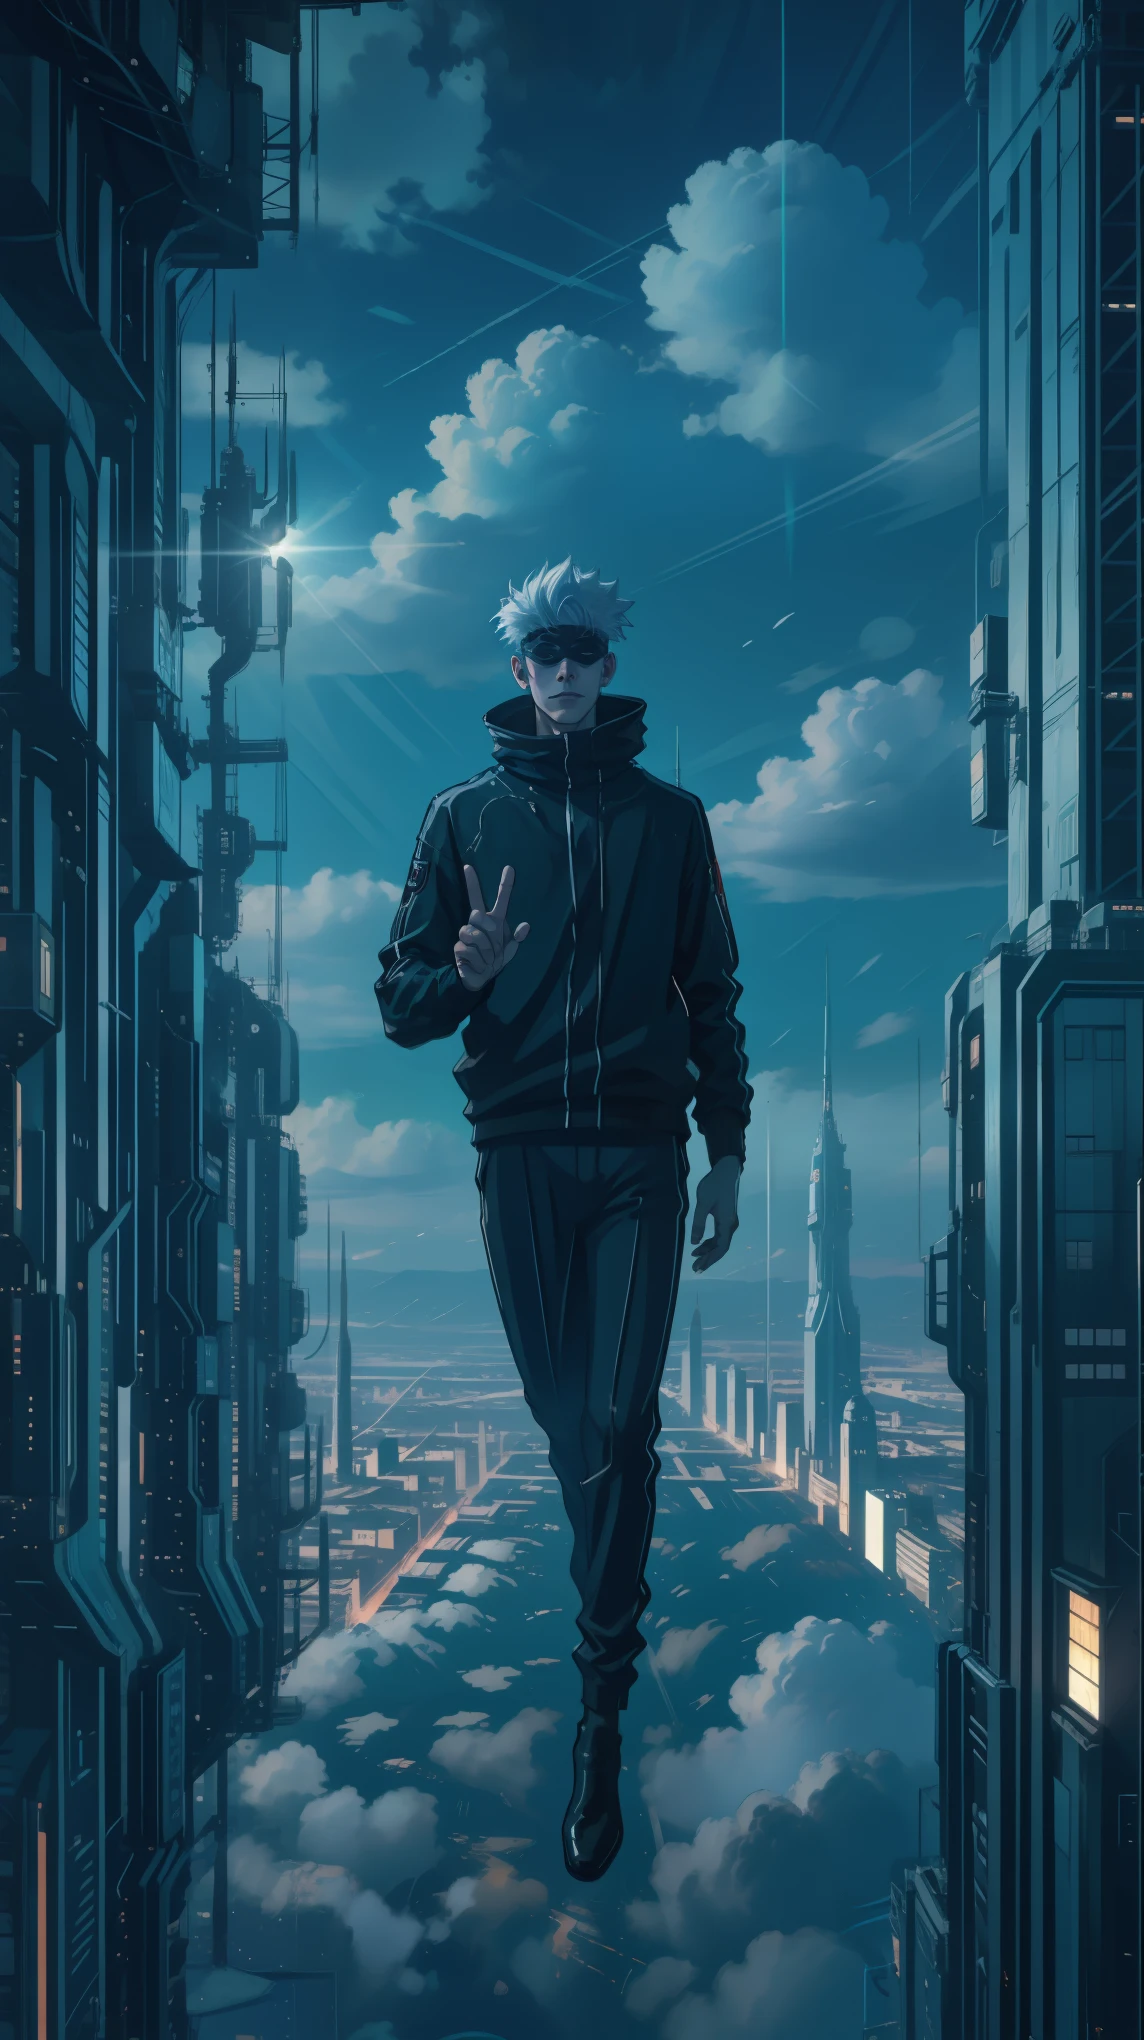 1boy, full body shot, perfect hand and fingers, satoru gojo, blindfold, black outfit, white hair, look at sky, smirk, red and blue moon city night background, wallpaper, cinematic,High resolution 8K, Bright light illumination, lens flare, sharpness, masterpiece, top-quality, The ultra -The high-definition, high resolution, extremely details CG, Anime style, Film Portrait Photography,masterpiece,hyperdetail